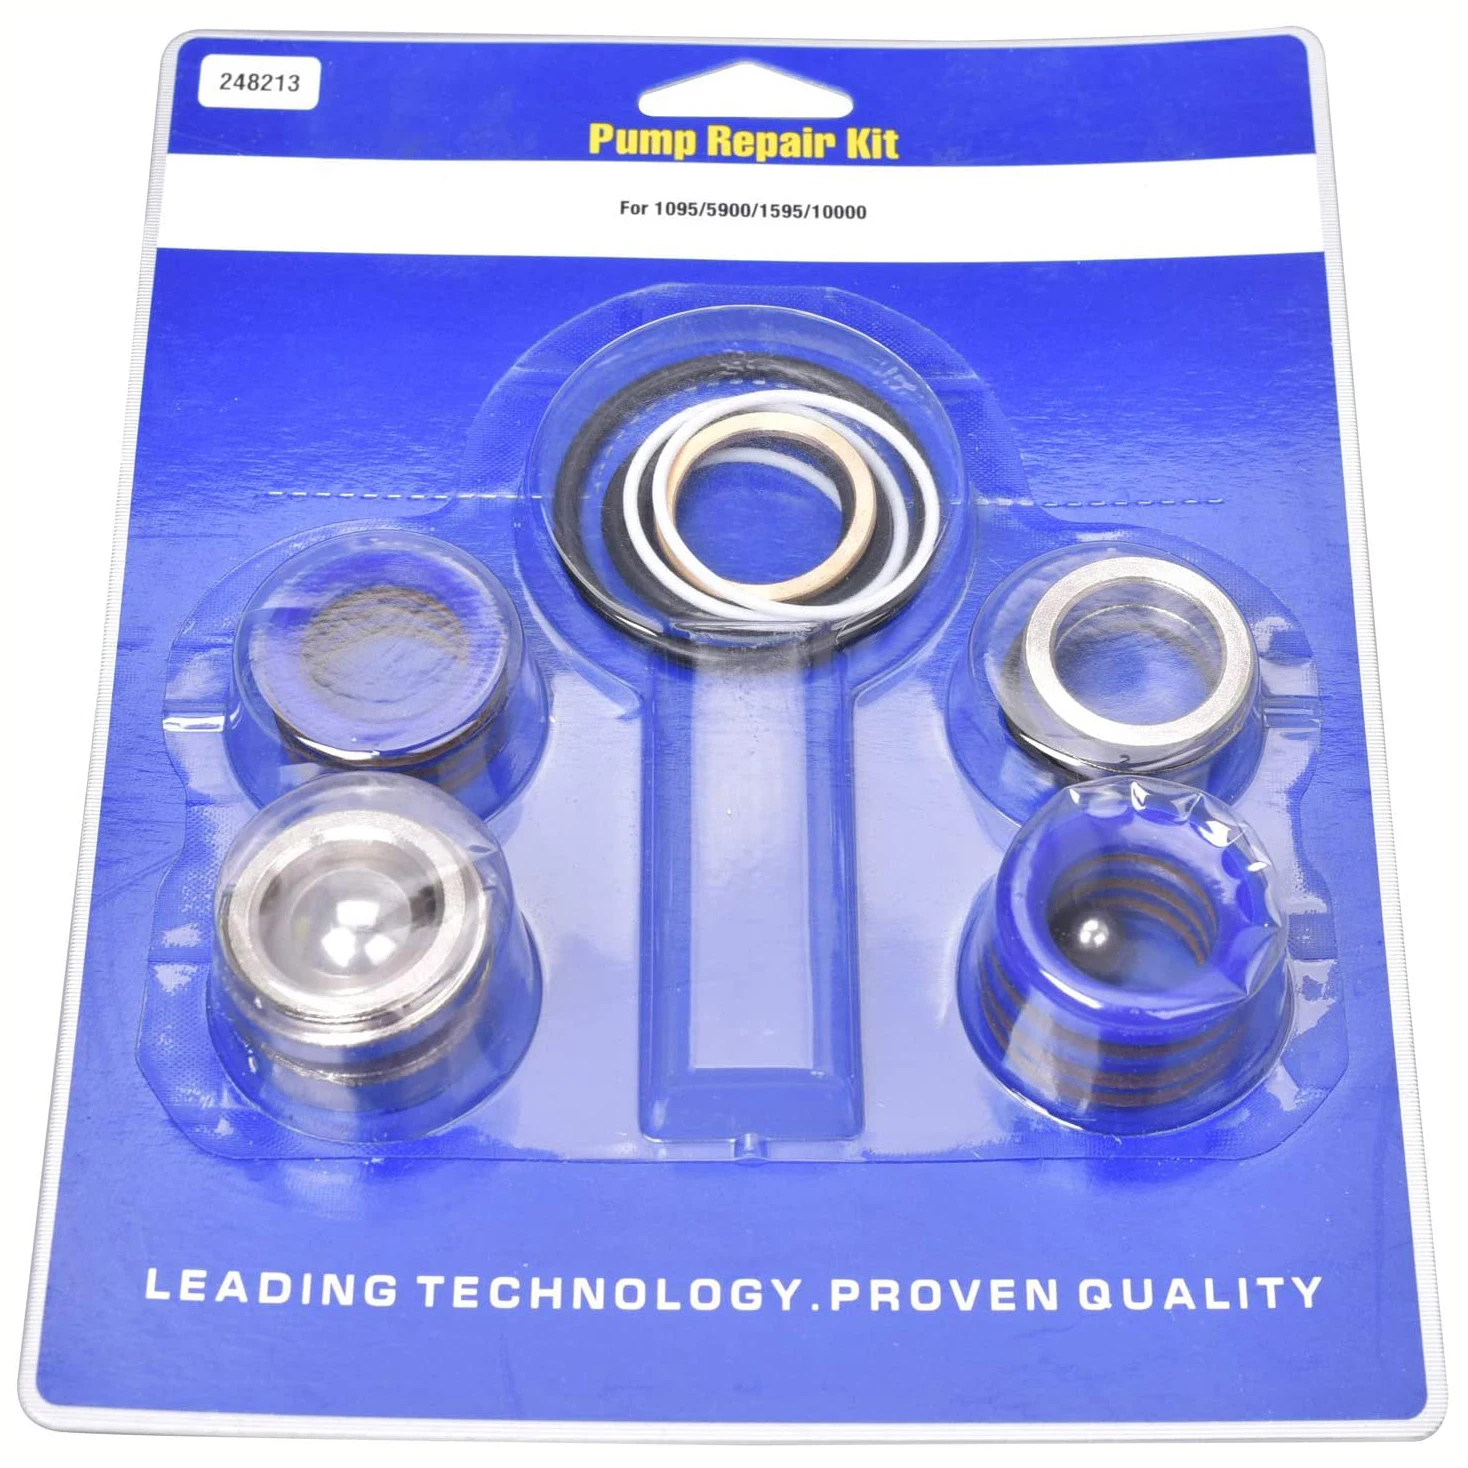 ProSource Aftermarket Packing Repair Kit 248213 or 248-213 Made in the USA! 